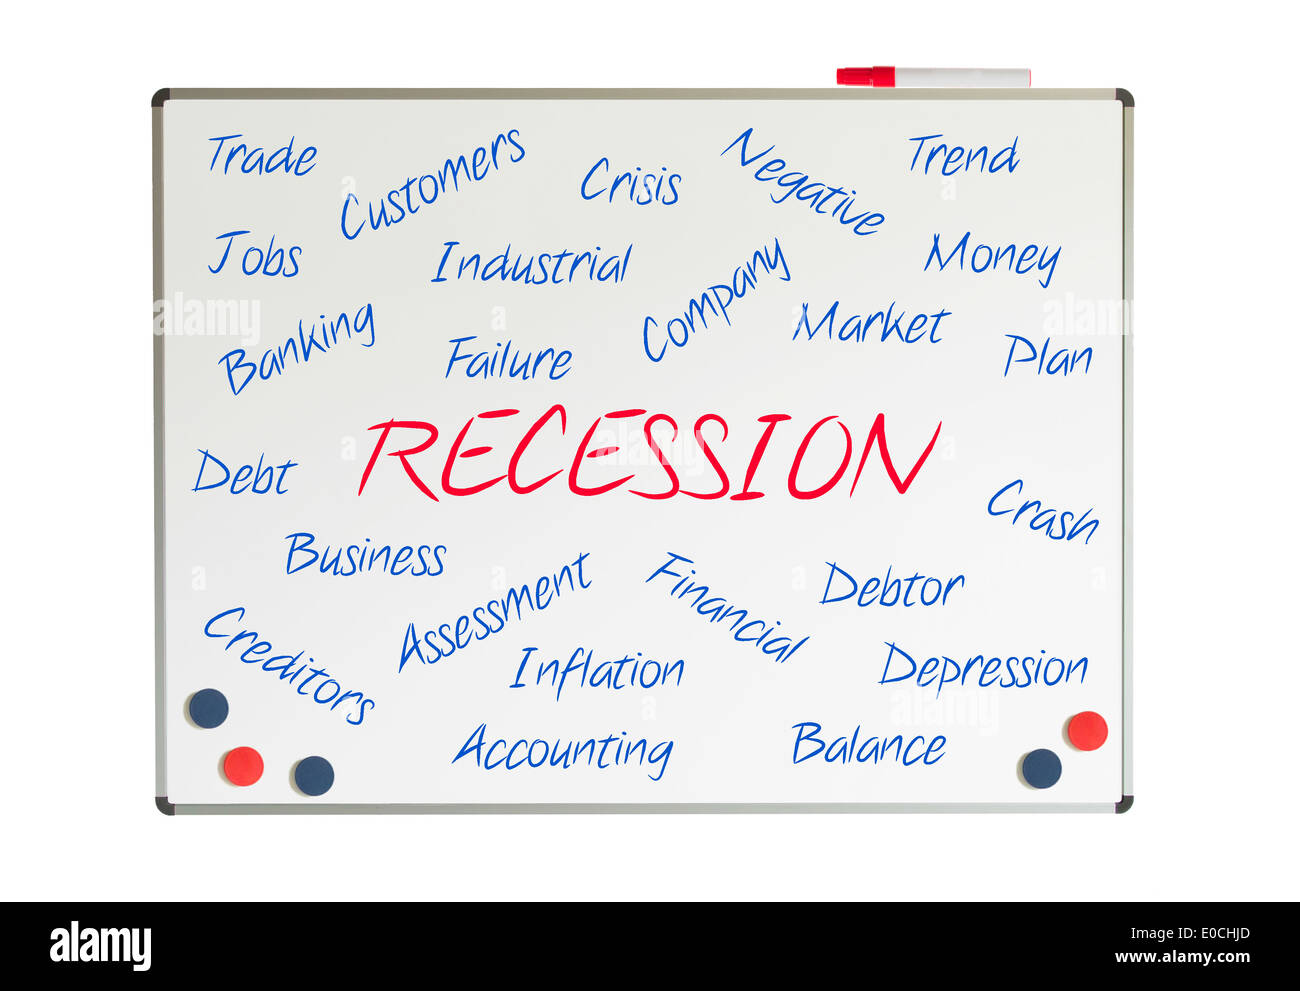 Recession word cloud written on a whiteboard Stock Photo